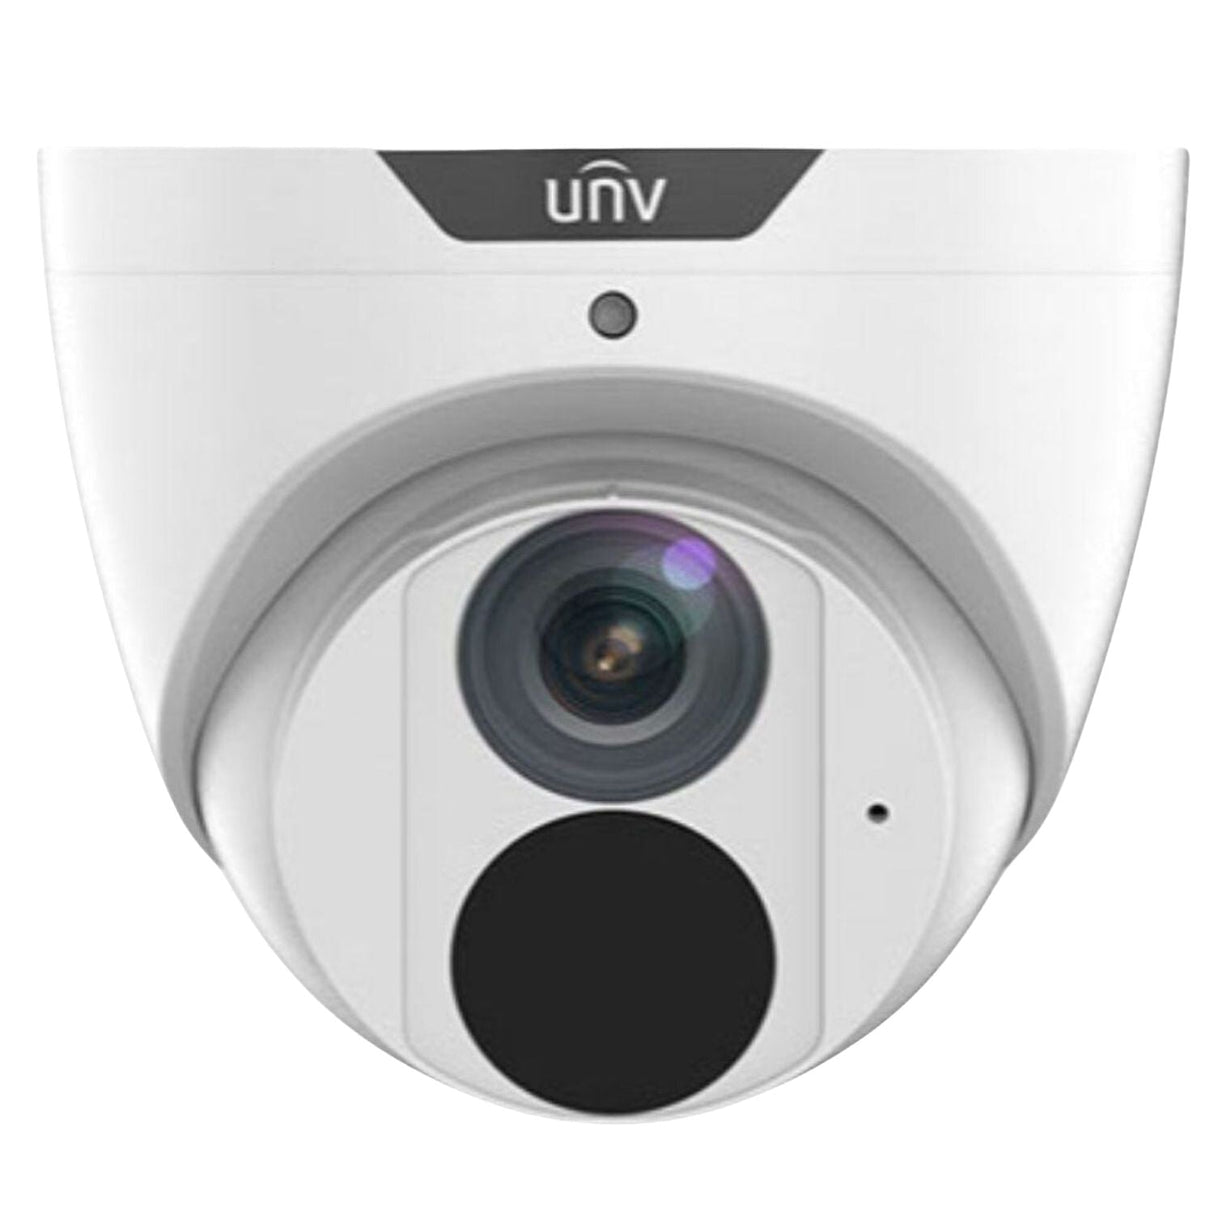 Uniview EasyStar Security System: 8x 6MP Turret Cams, 8CH 4K NVR + HDD (Black)